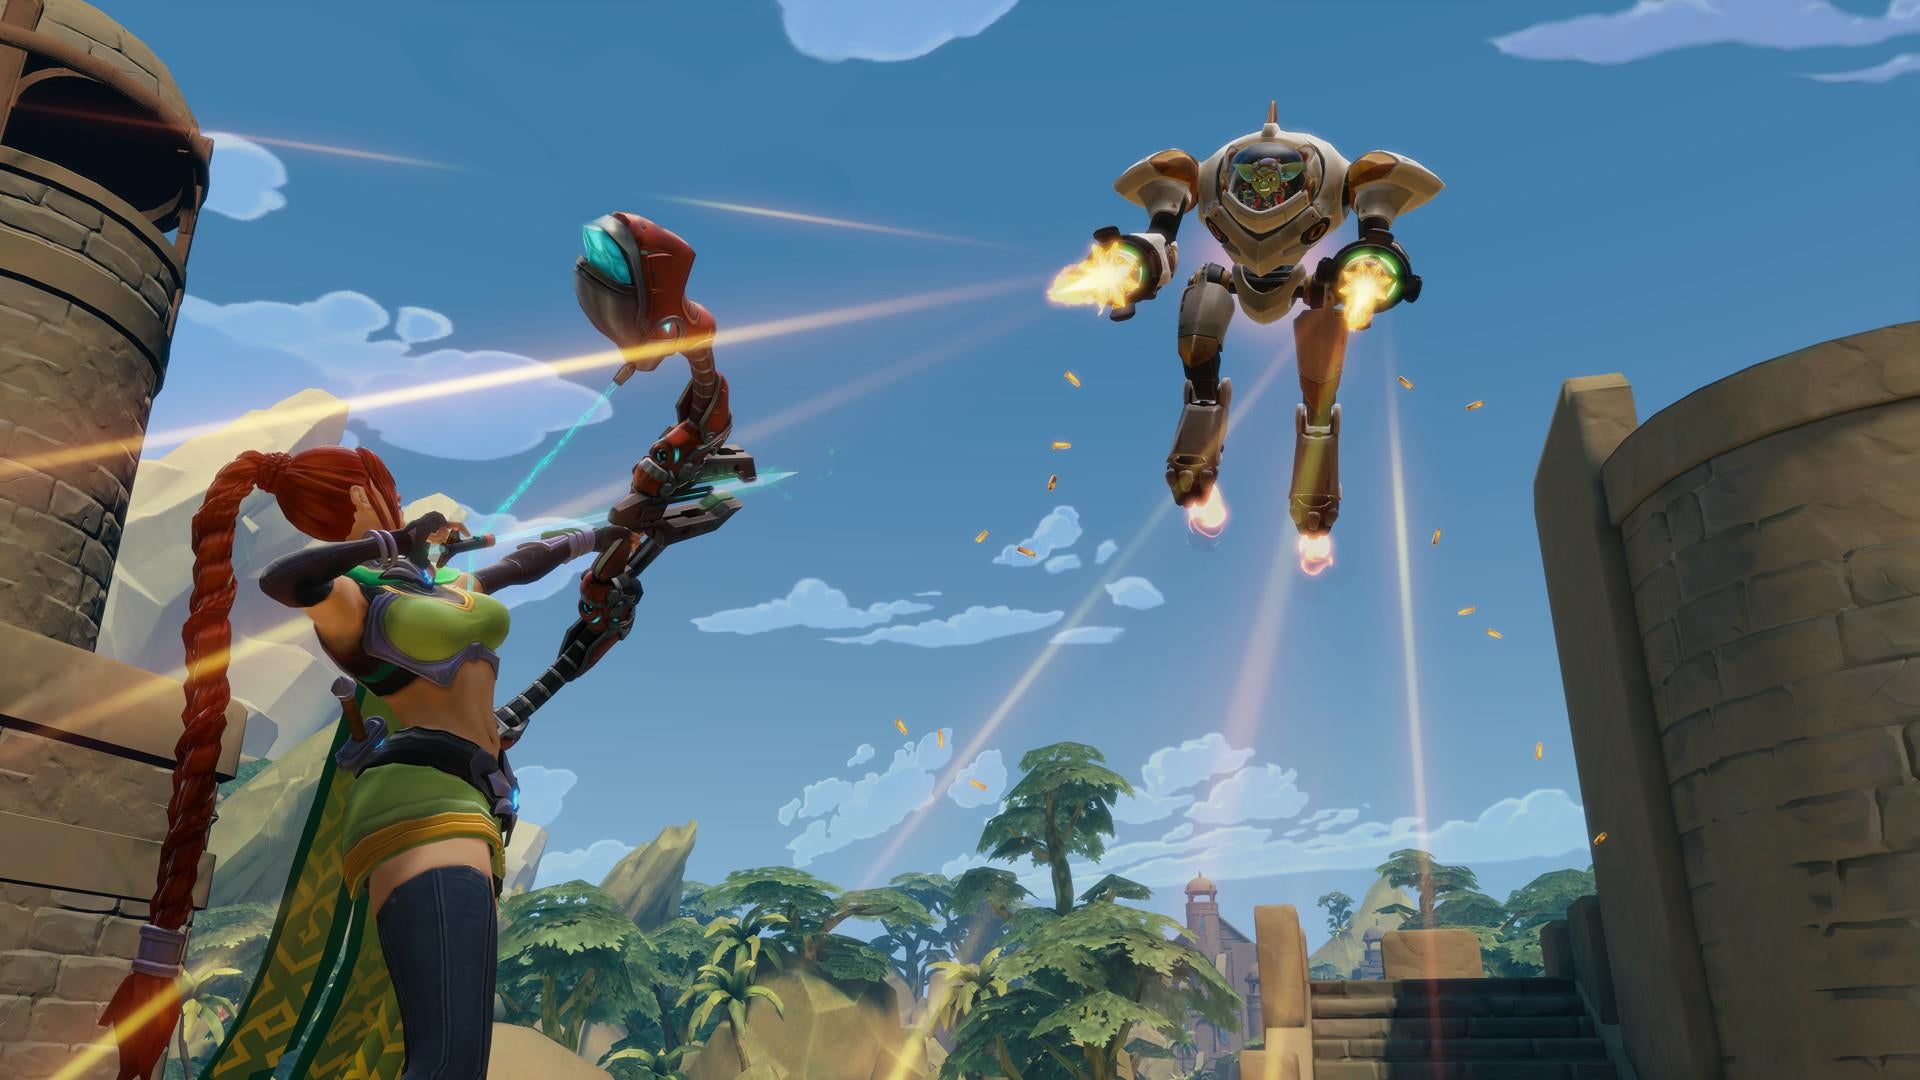 Image for Paladins is now available as a free-to-play console game